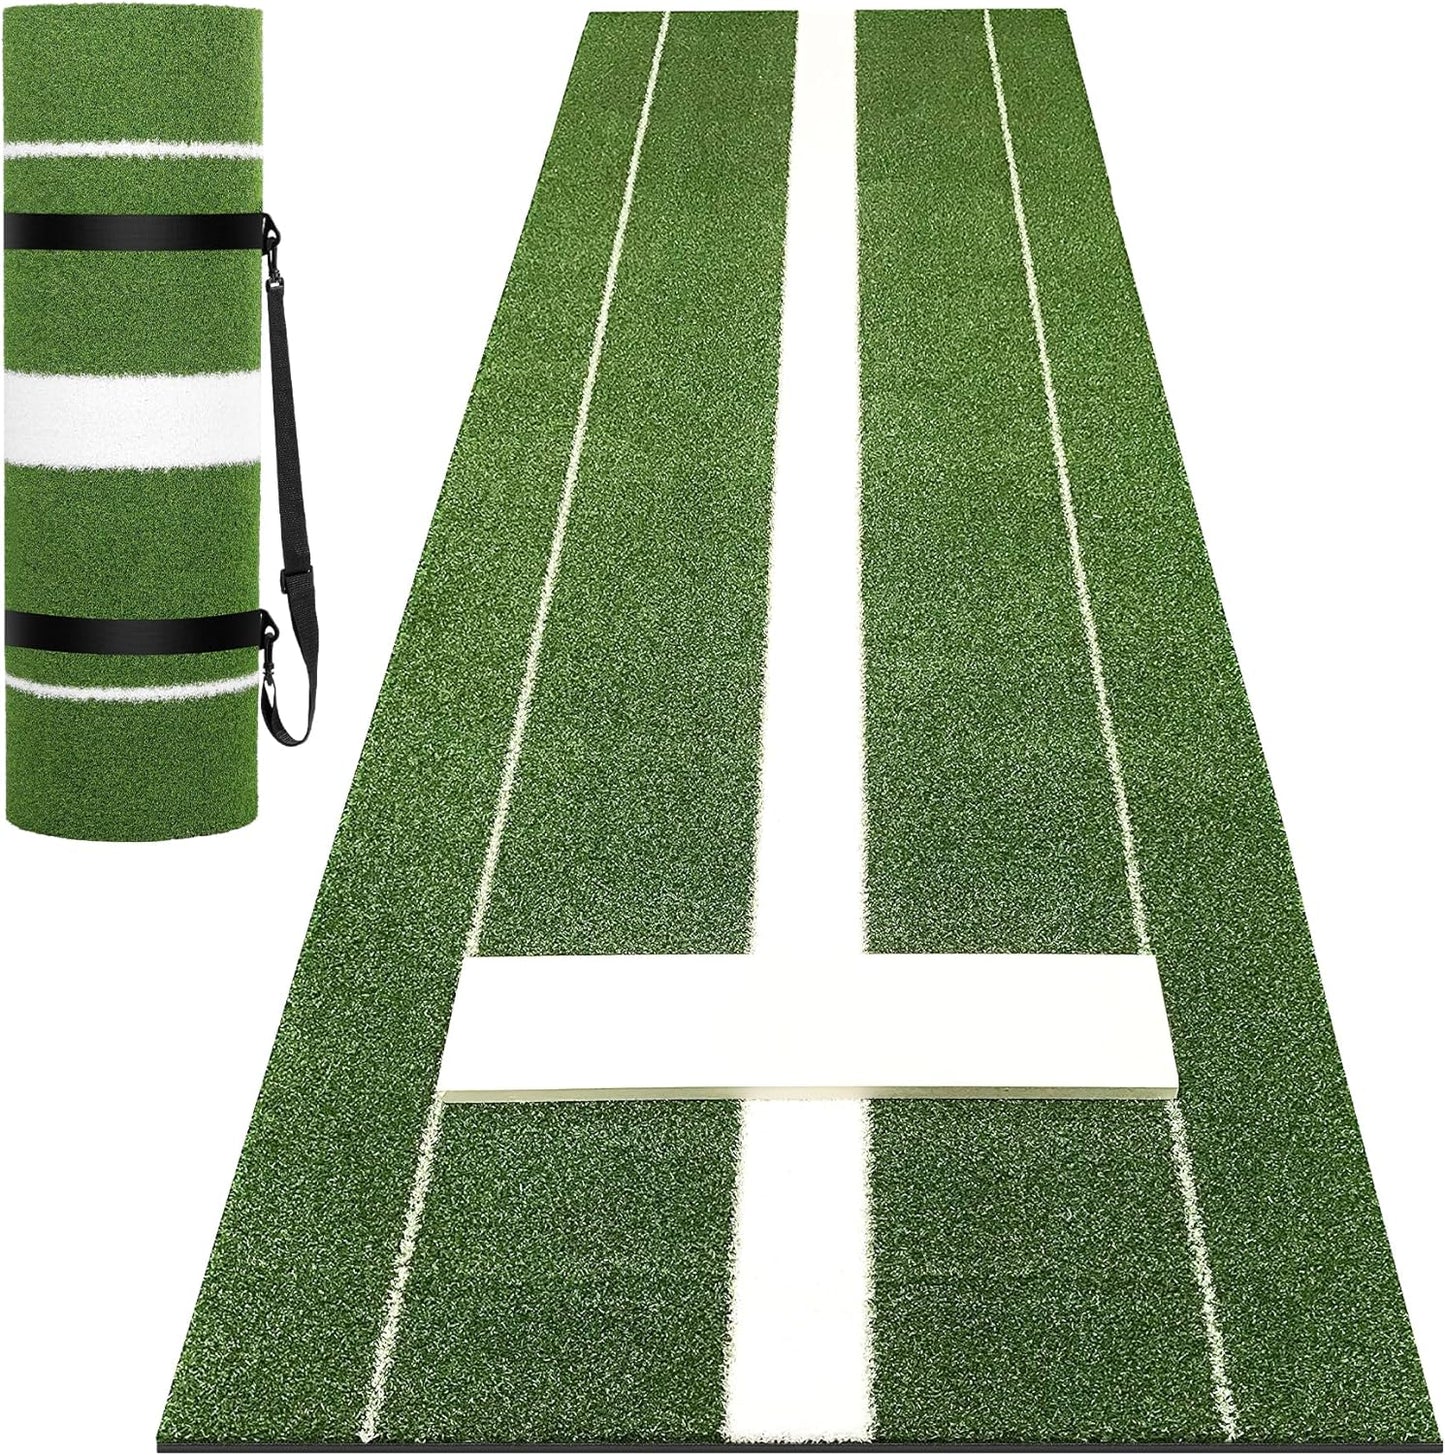 Rengue 10'x 3' Softball Pitching Mat, Softball Pitching Mound with Pitching Rubber, Green Nylon Softball Hitting Mat Artificial Grass Pitching Mat, Softball Pitching Aids for Indoor & Outdoor